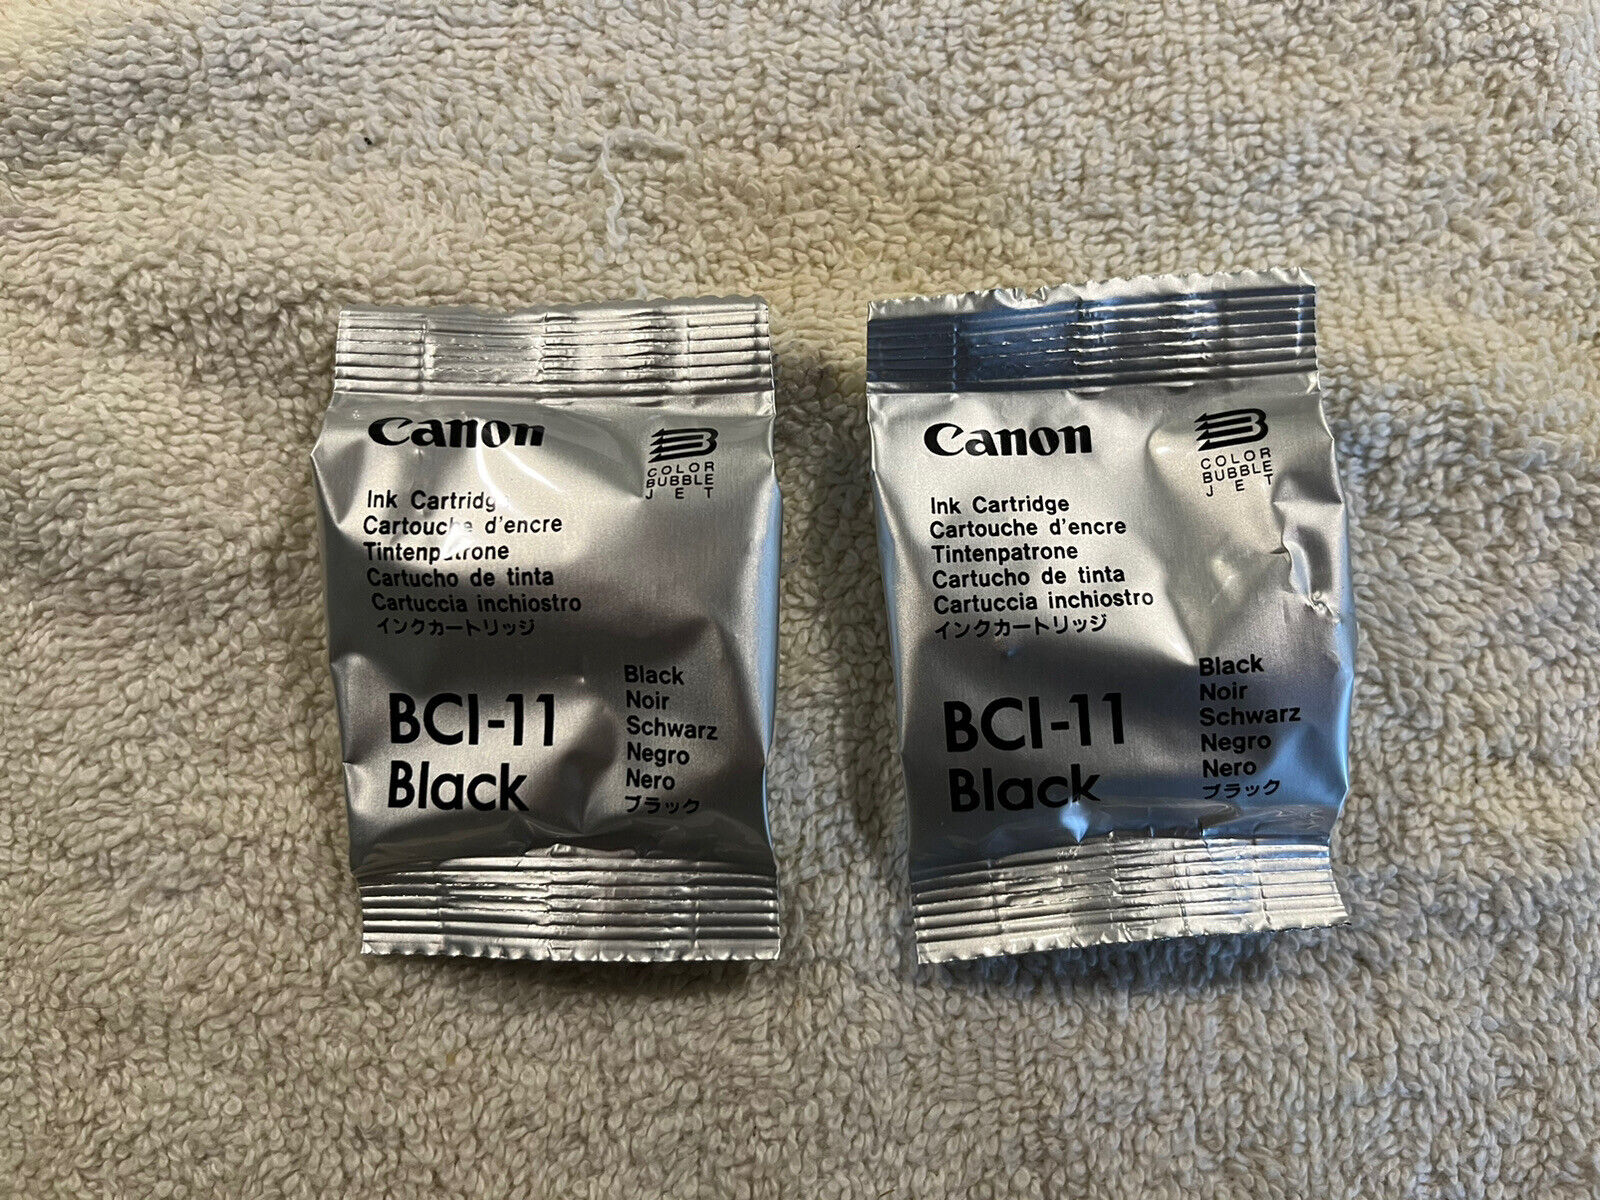 2 Genuine Canon BCI-11 Black Ink Cartridges Sealed In Foil-No Box